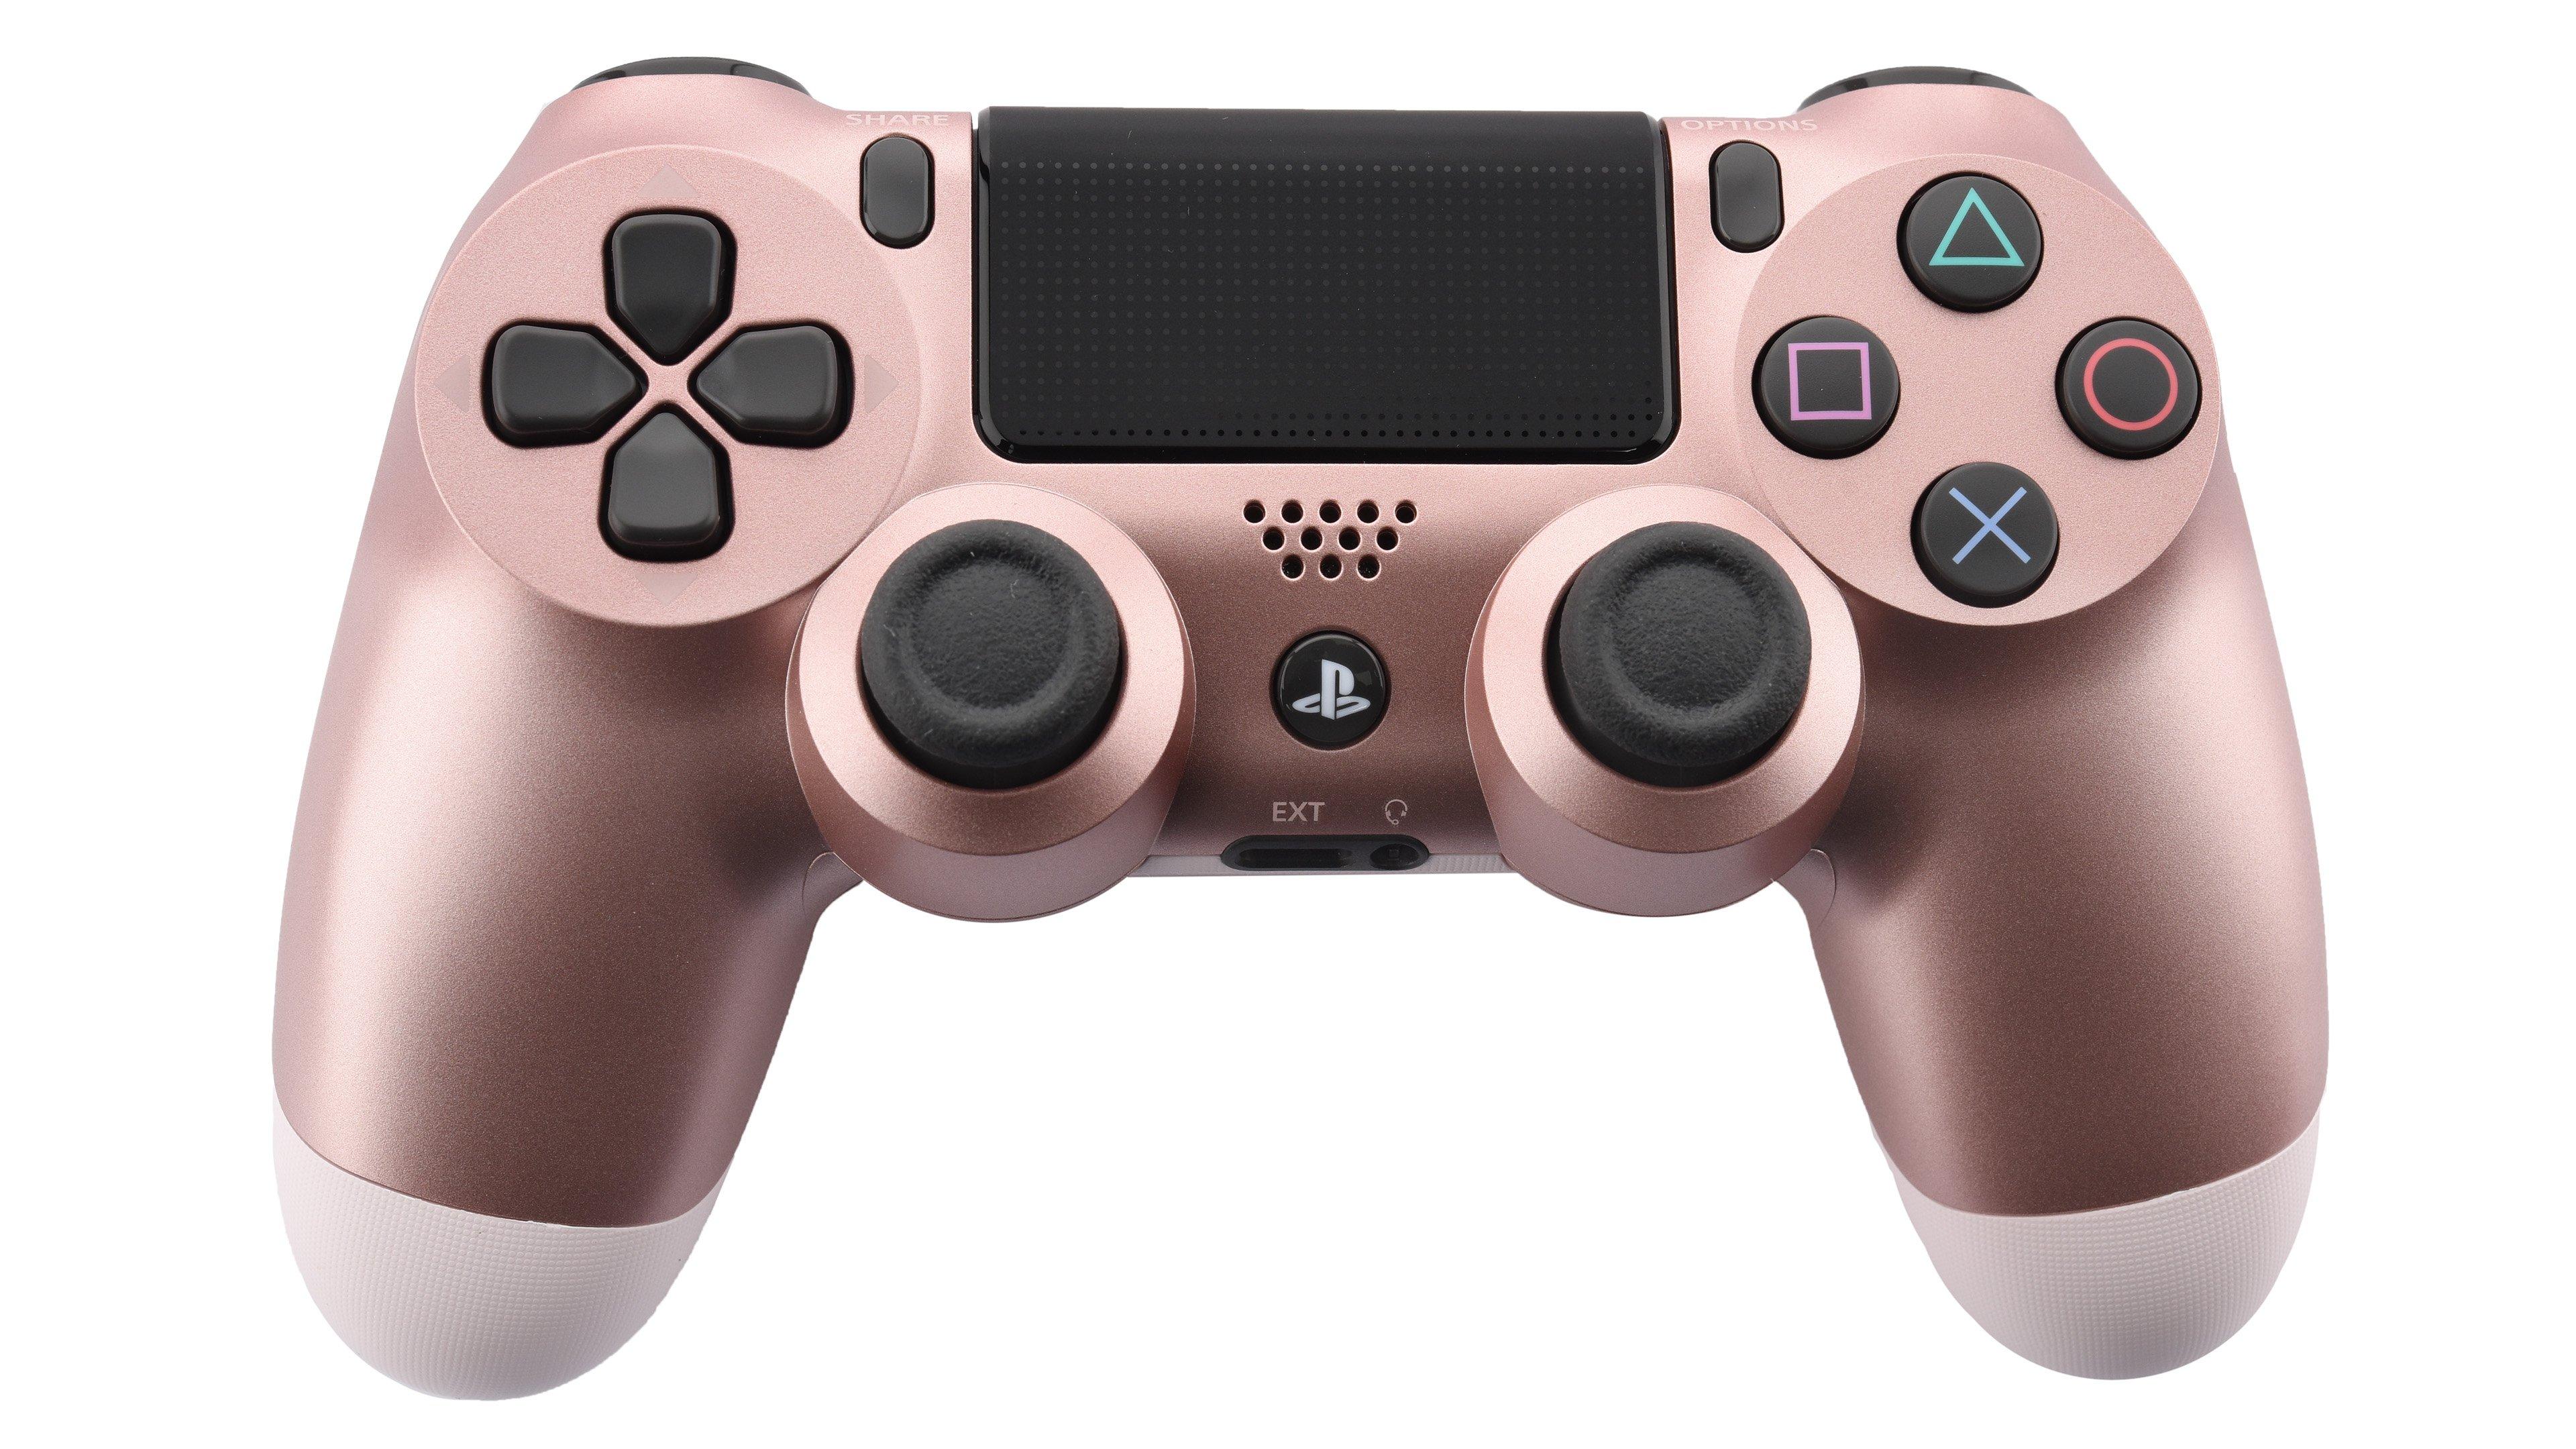 rose gold ps4 remote